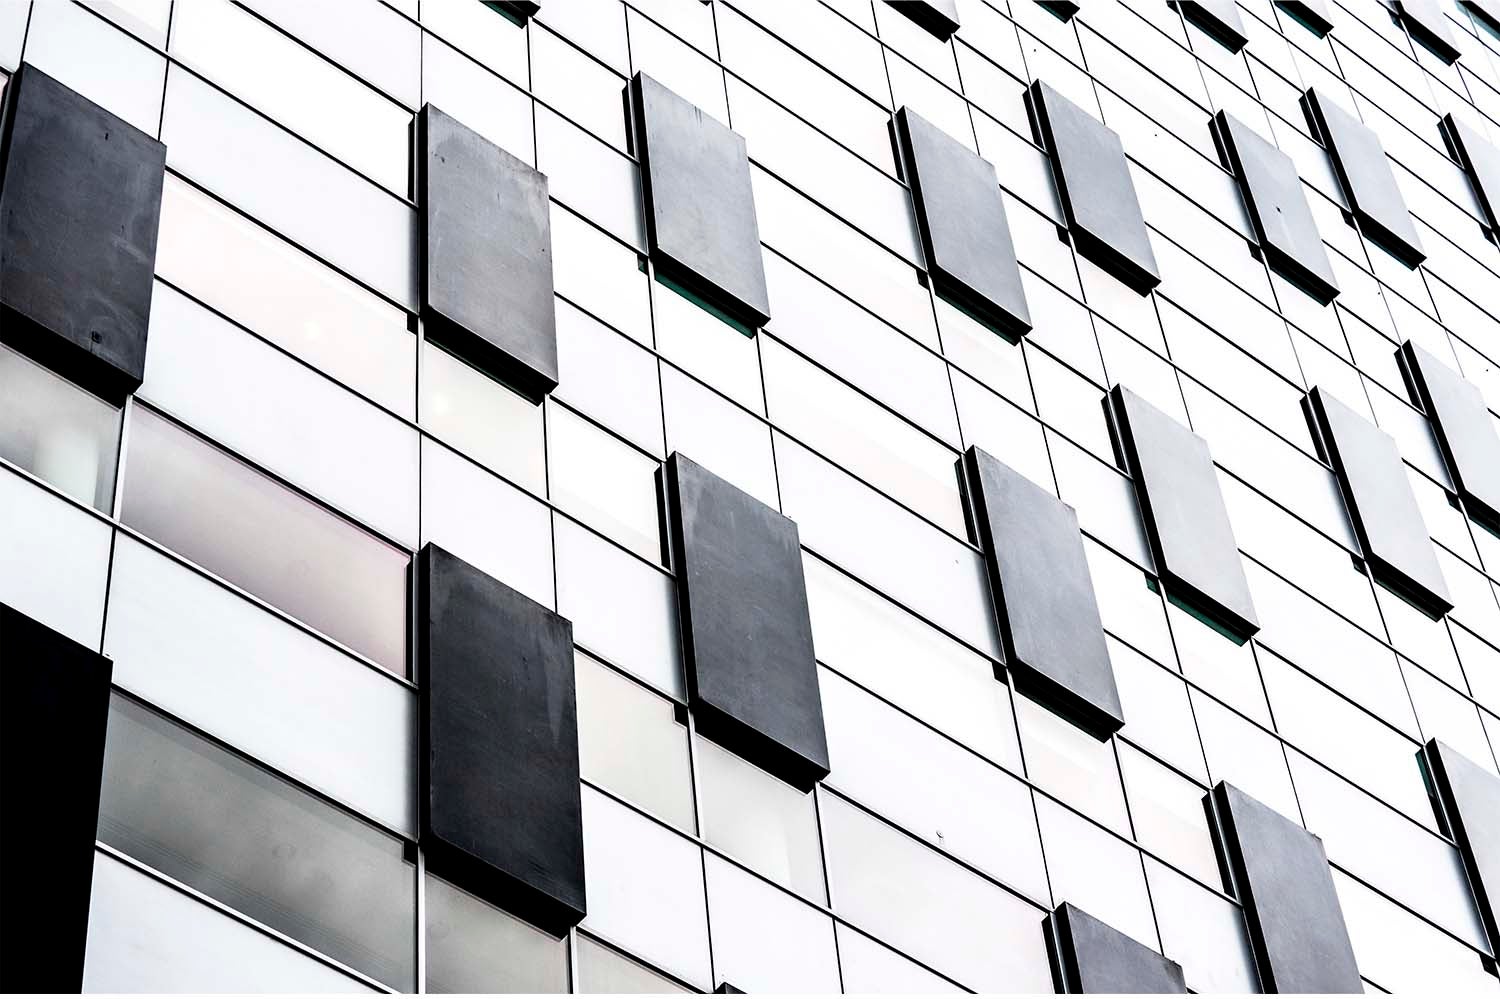 Abstract image of panels on the side of a building